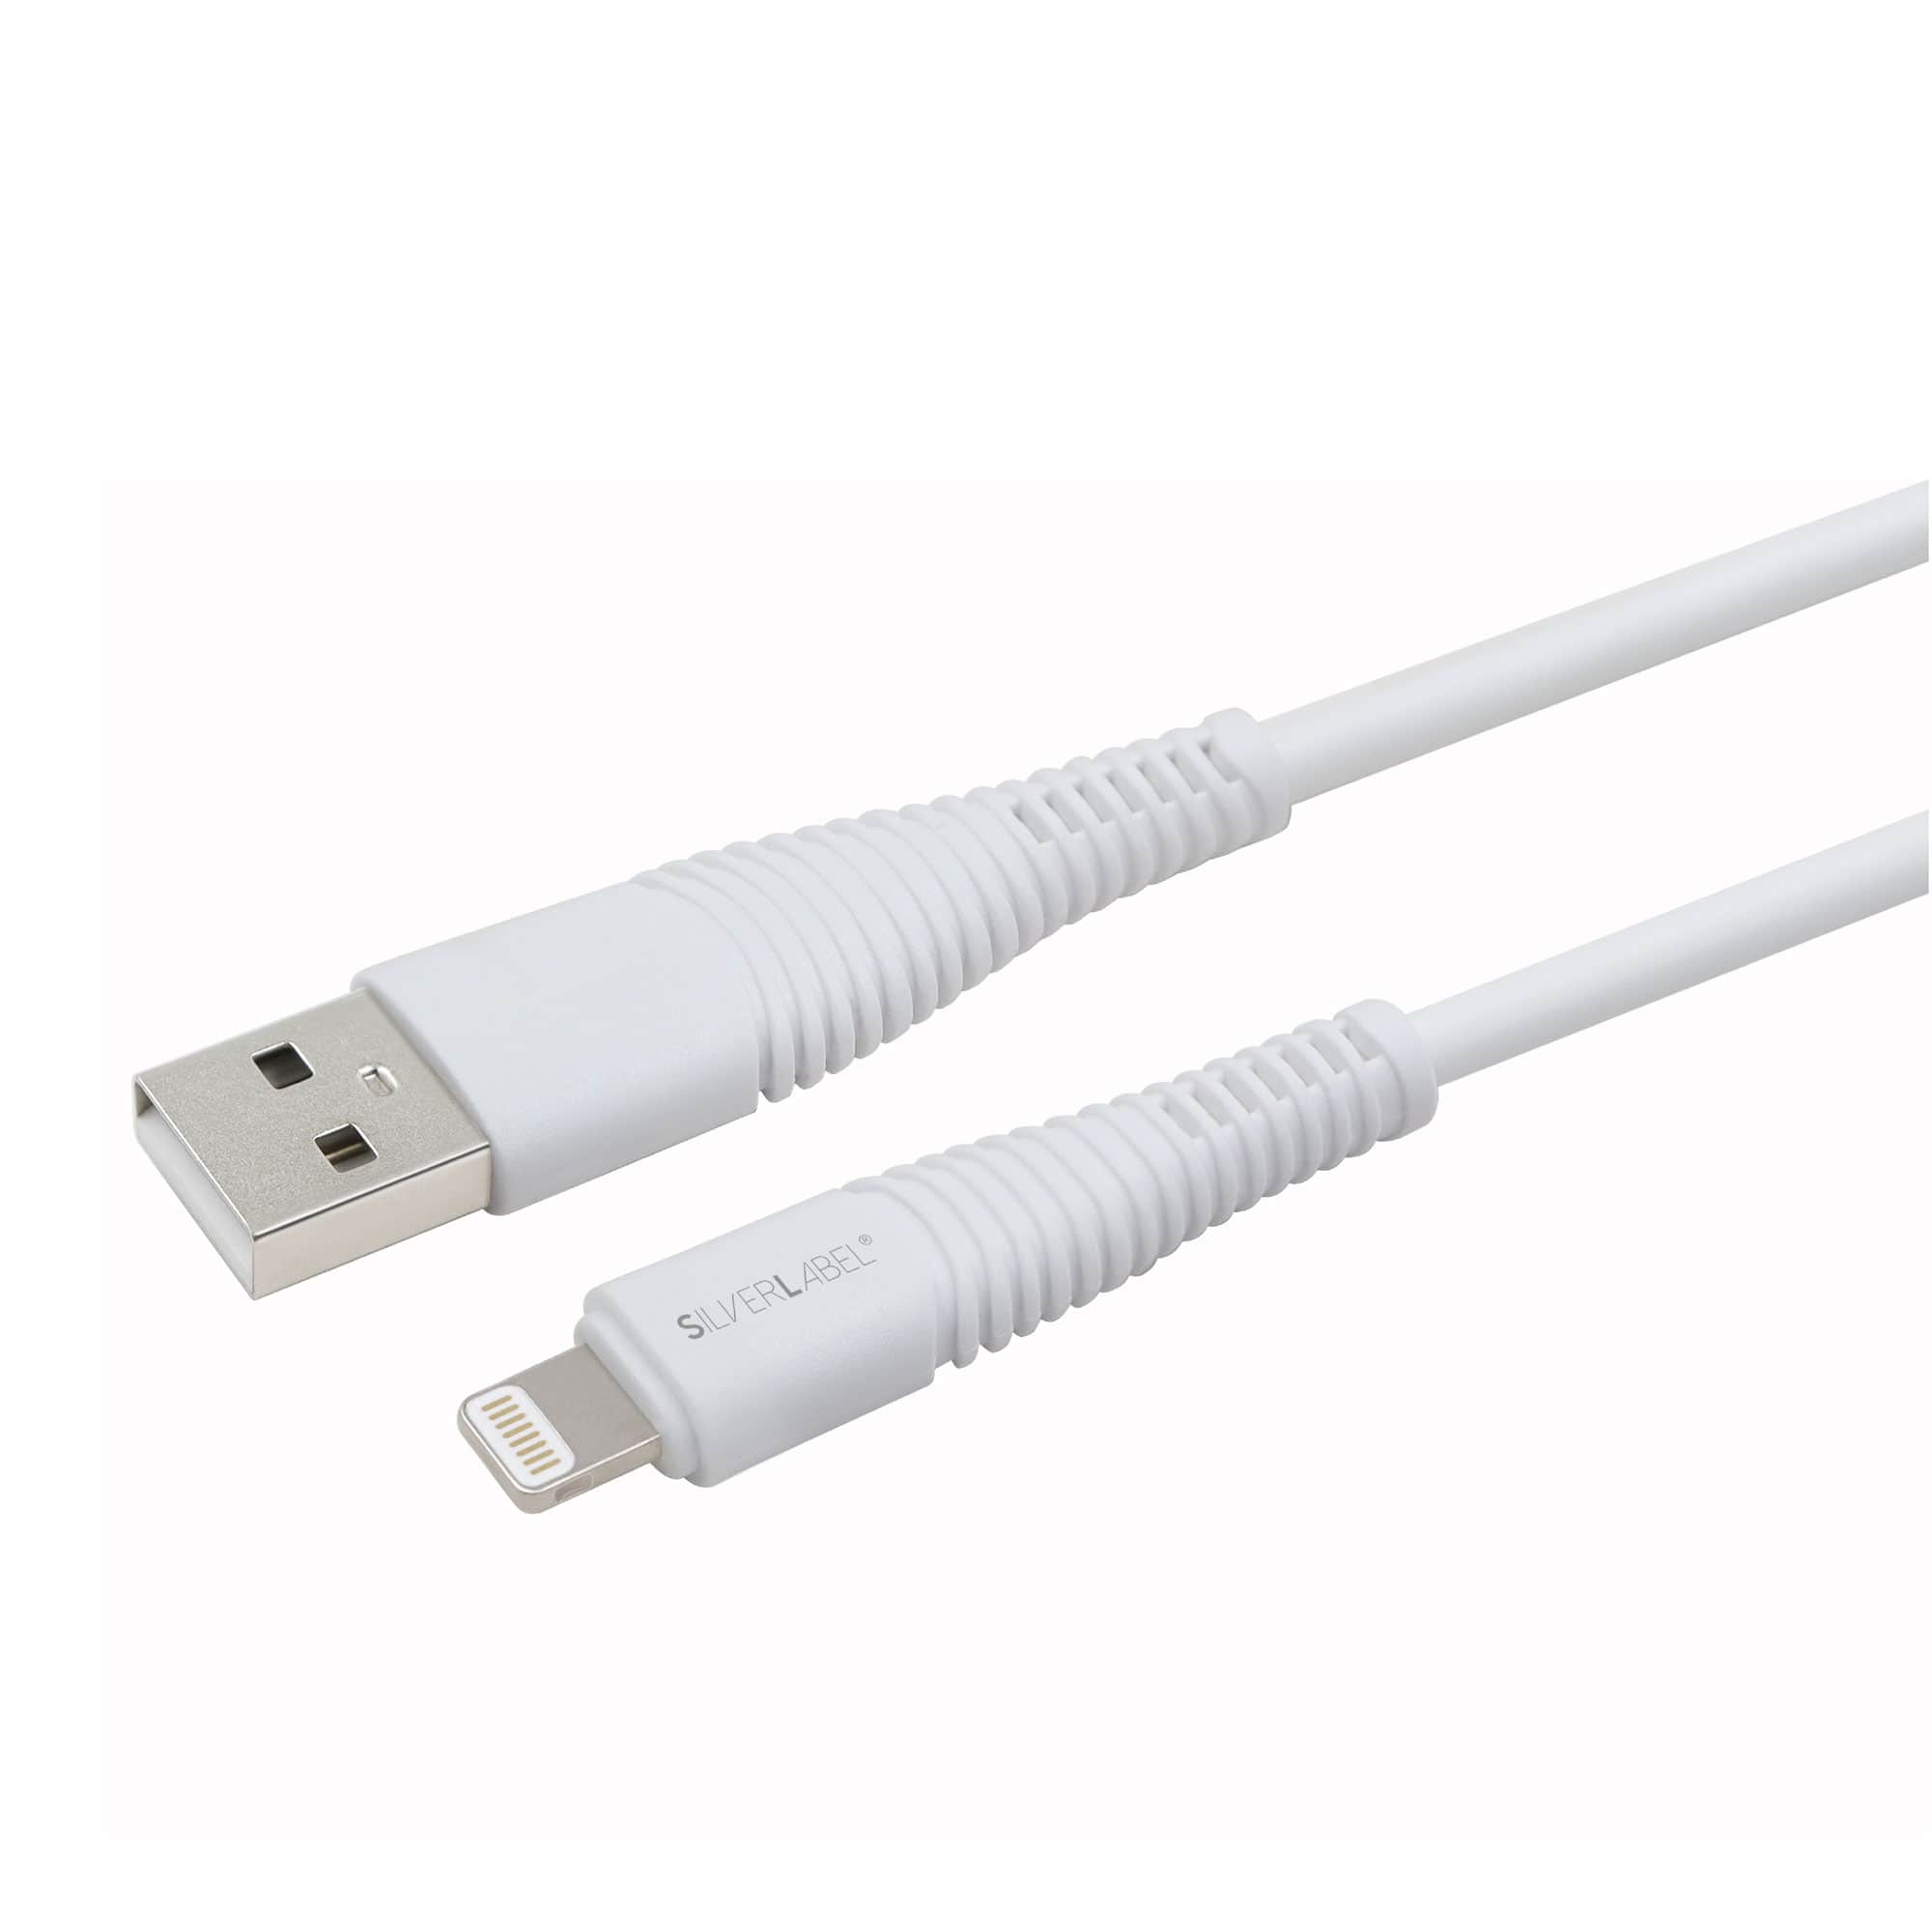 Lightning to USB-A Charge Cable - 1M